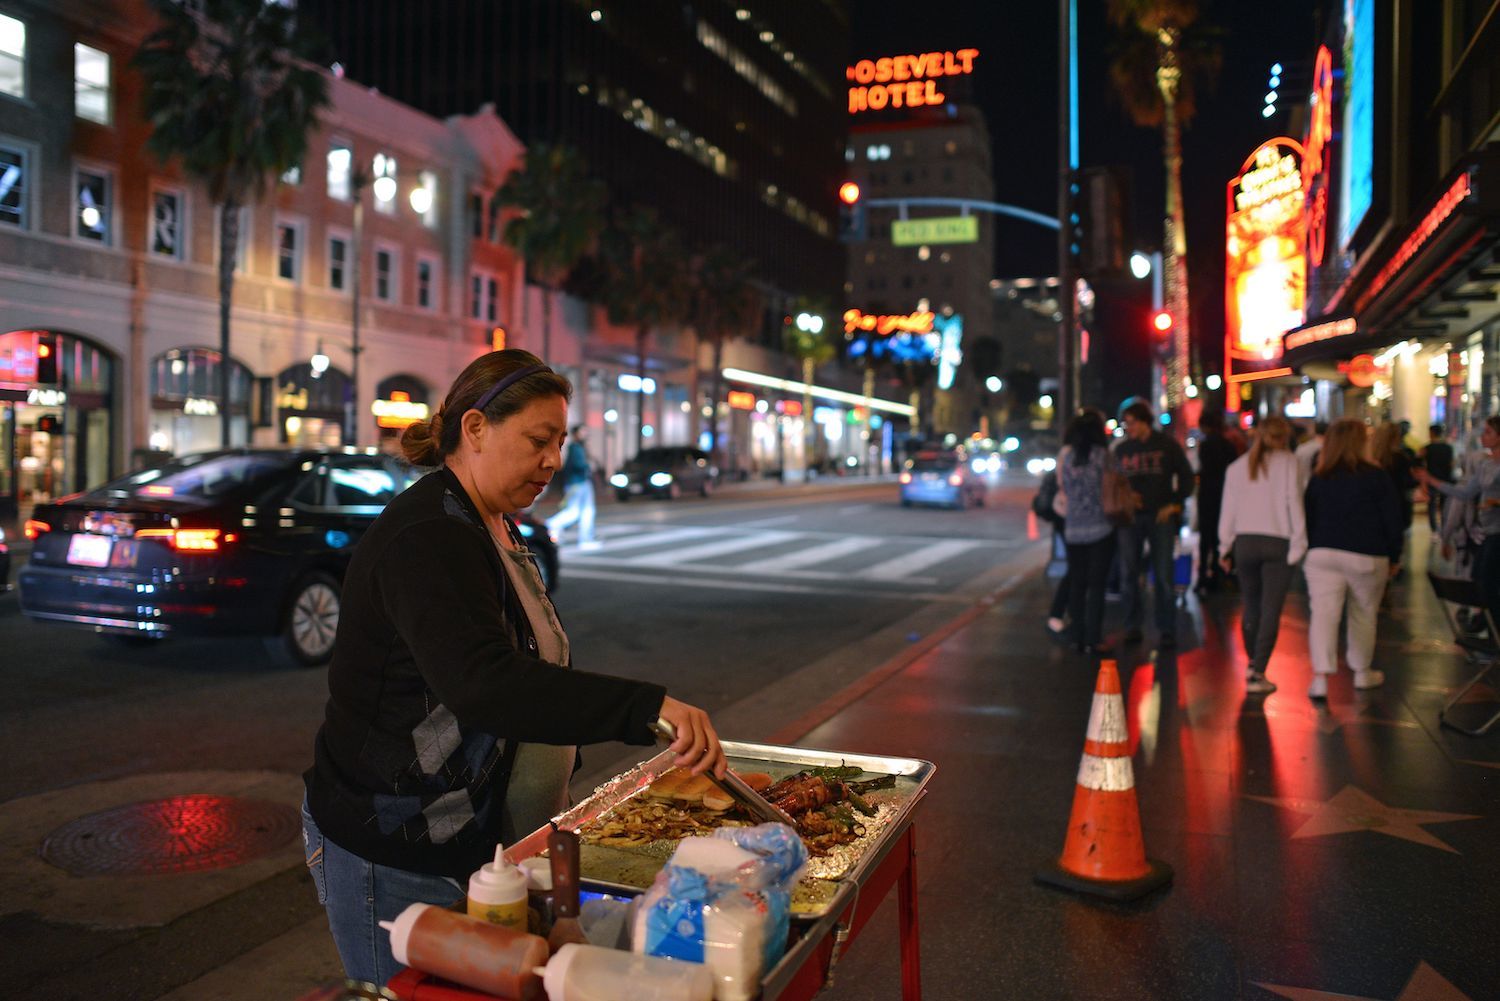 Maria Navas prepares hot dogs in front of the Dolby Theatre on the Hollywood Walk of Fame, in Los Angeles, on March 18, 2019. - Navas arrived to the United States from Mexico City, 